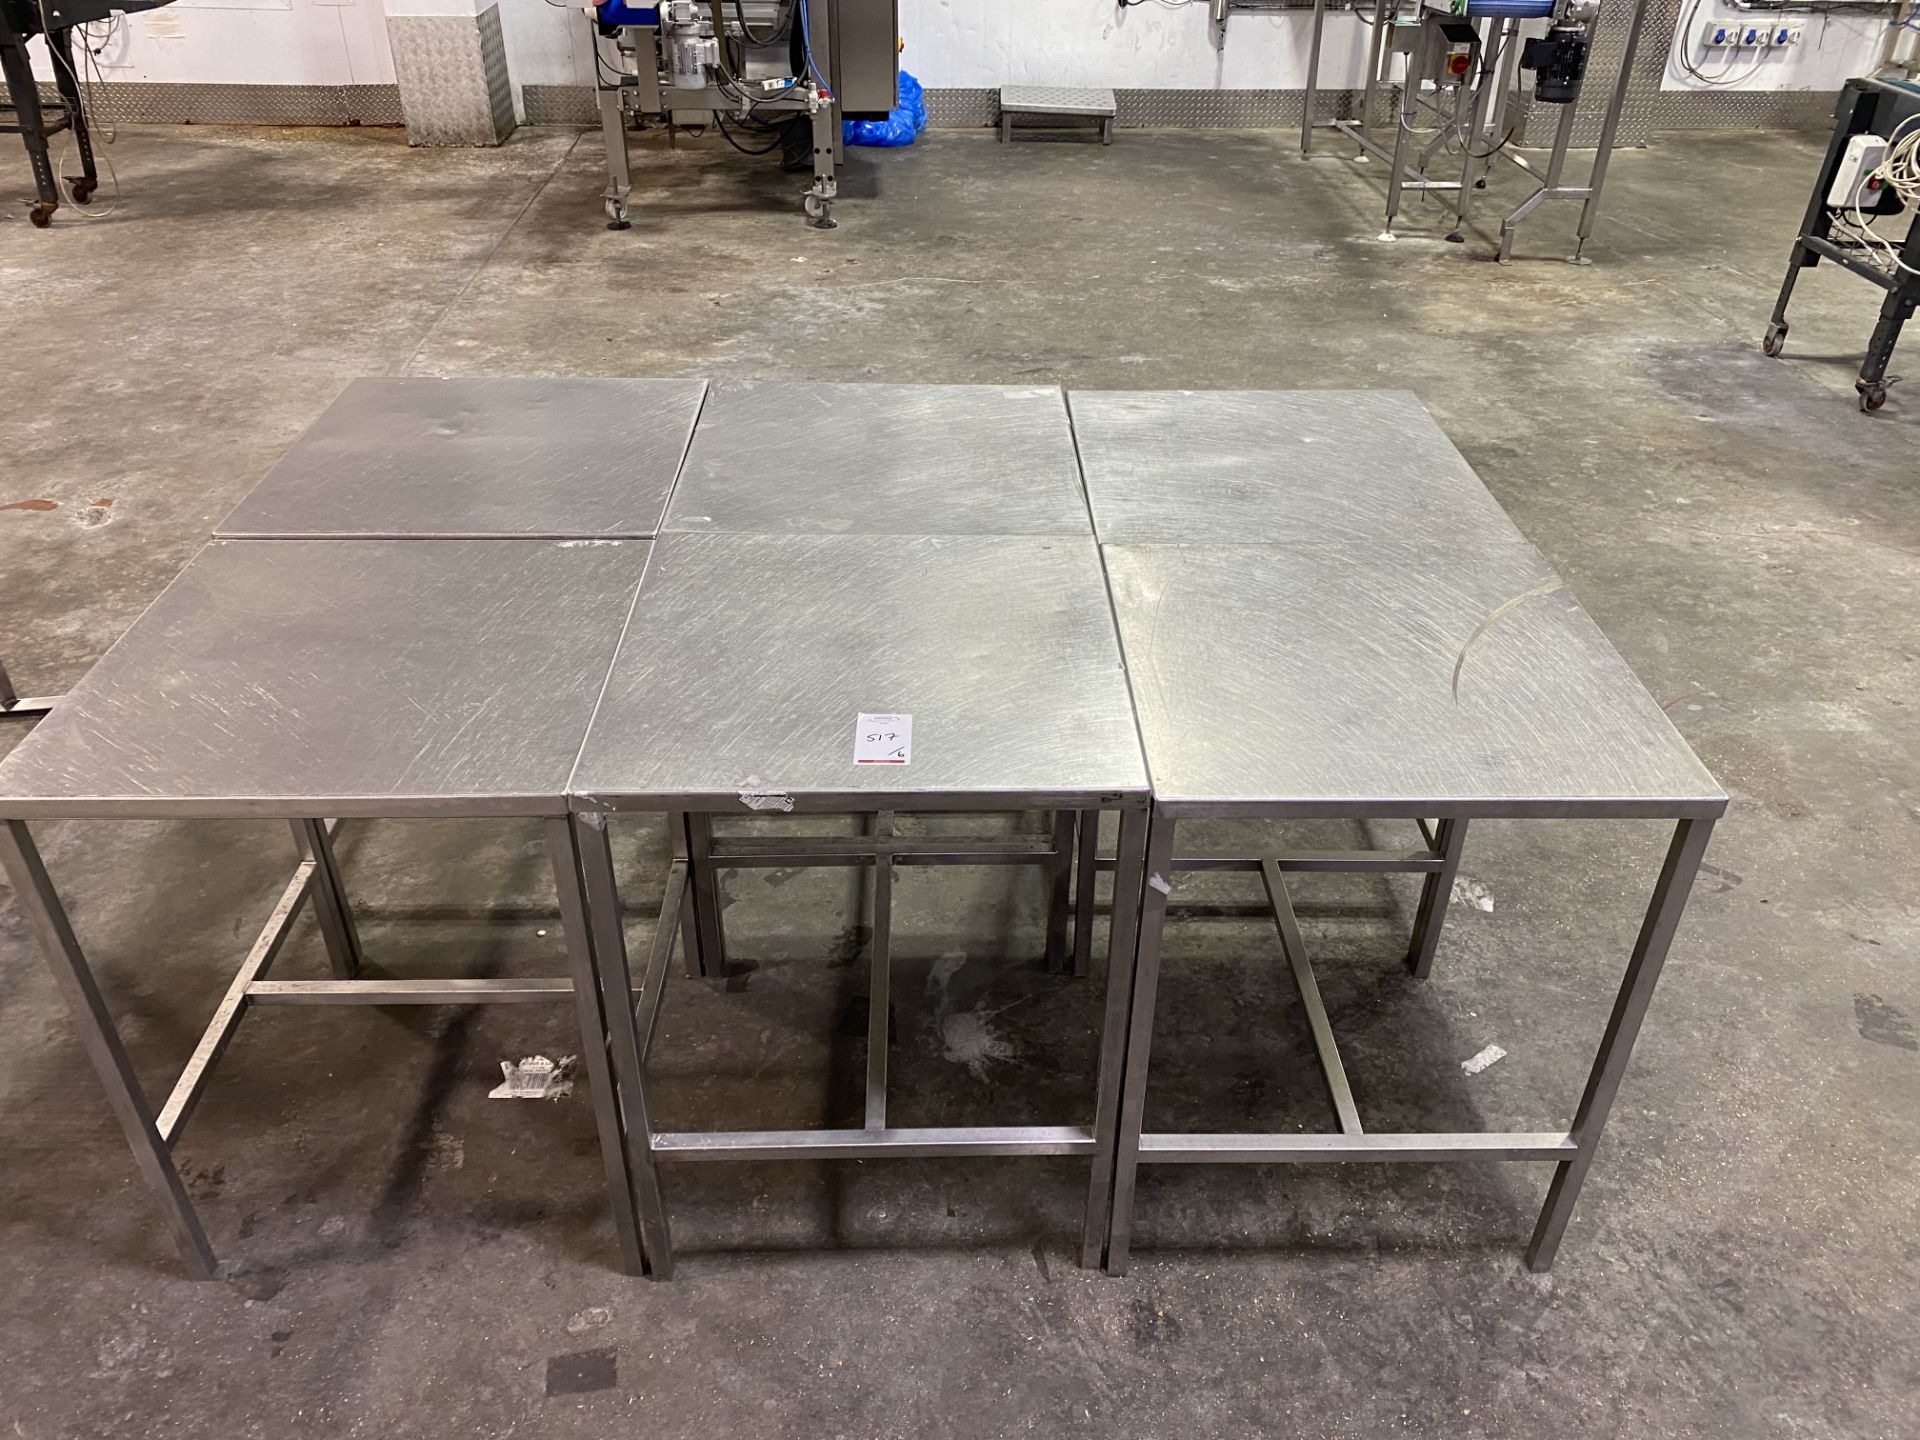 6 square stainless steel tables, width 60cm, heigh - Image 3 of 3